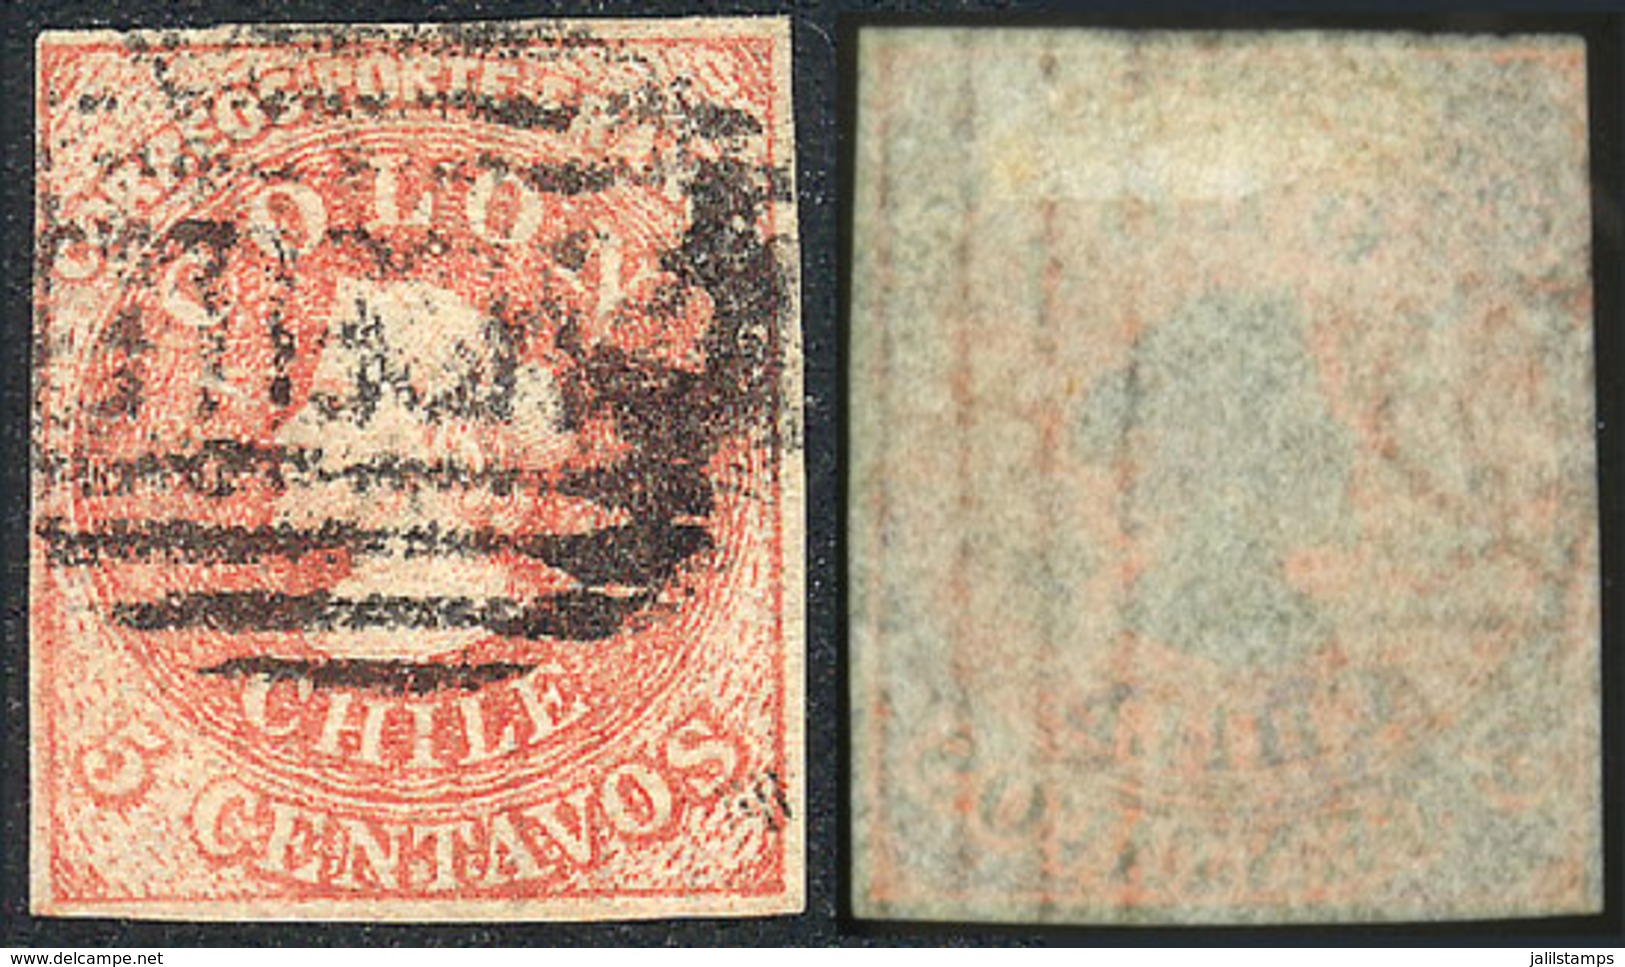 CHILE: Yvert 5, Variety Watermark Inverted And With 4 VERTICAL LINES, Ample Margins, VF Quality! - Chile